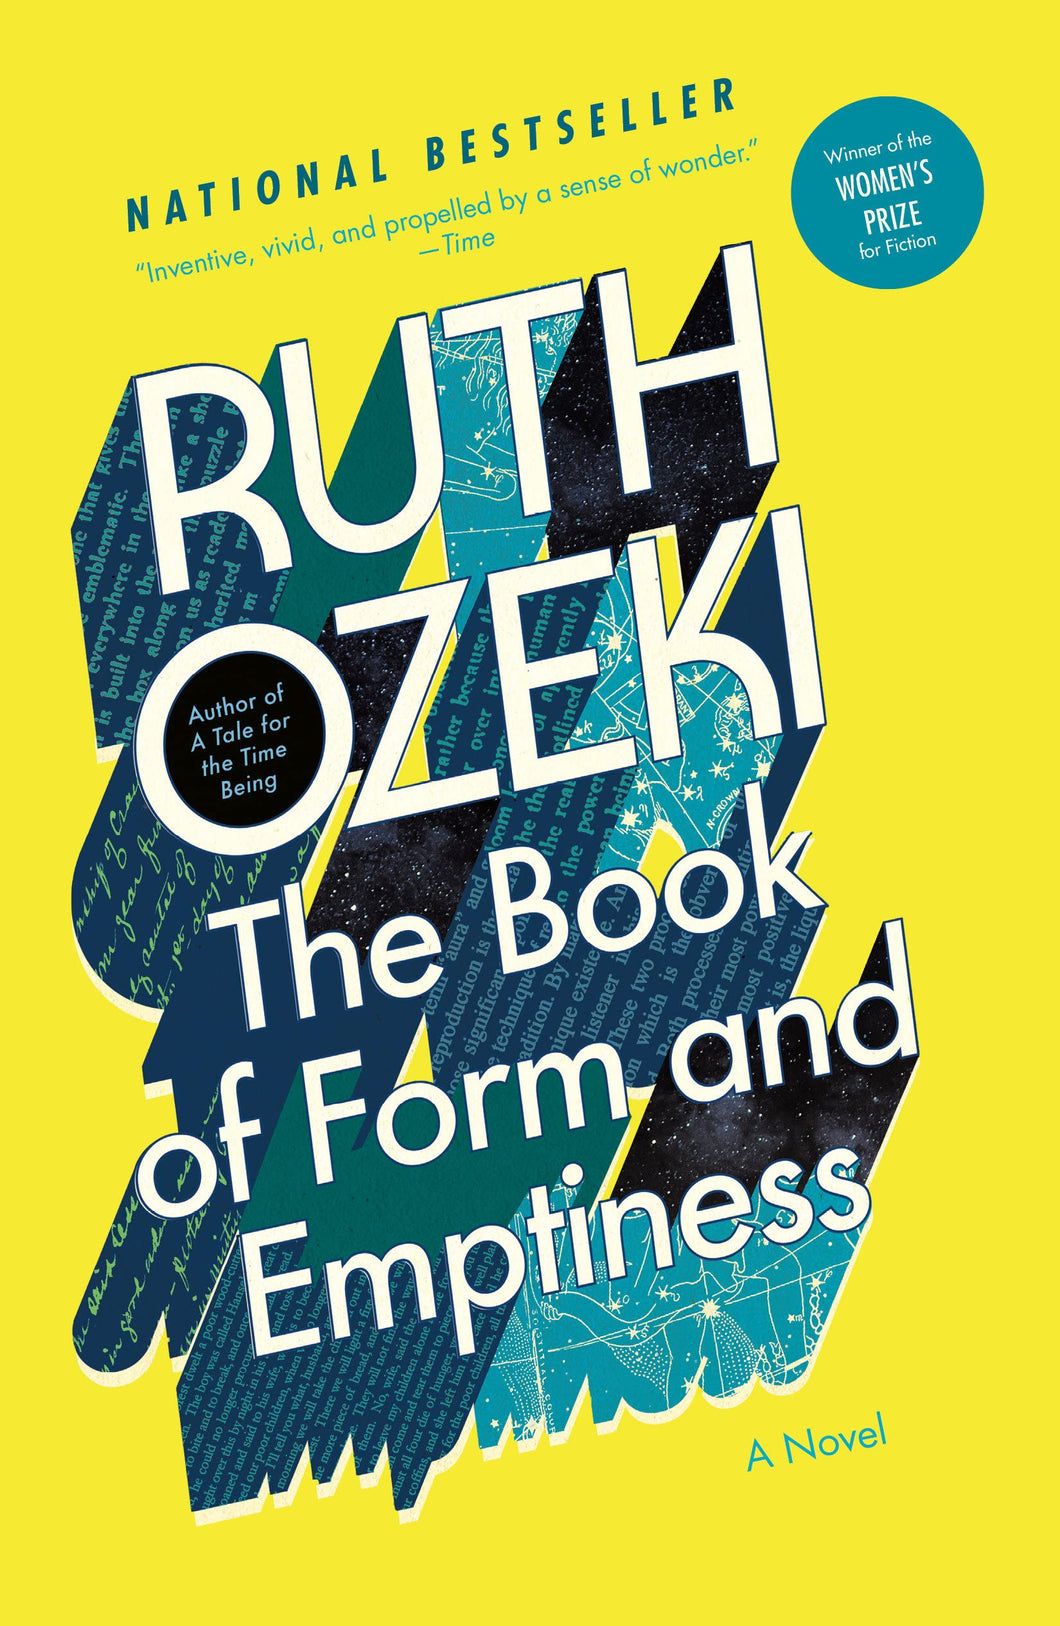 The Book of Form and Emptiness [Ruth Ozeki]